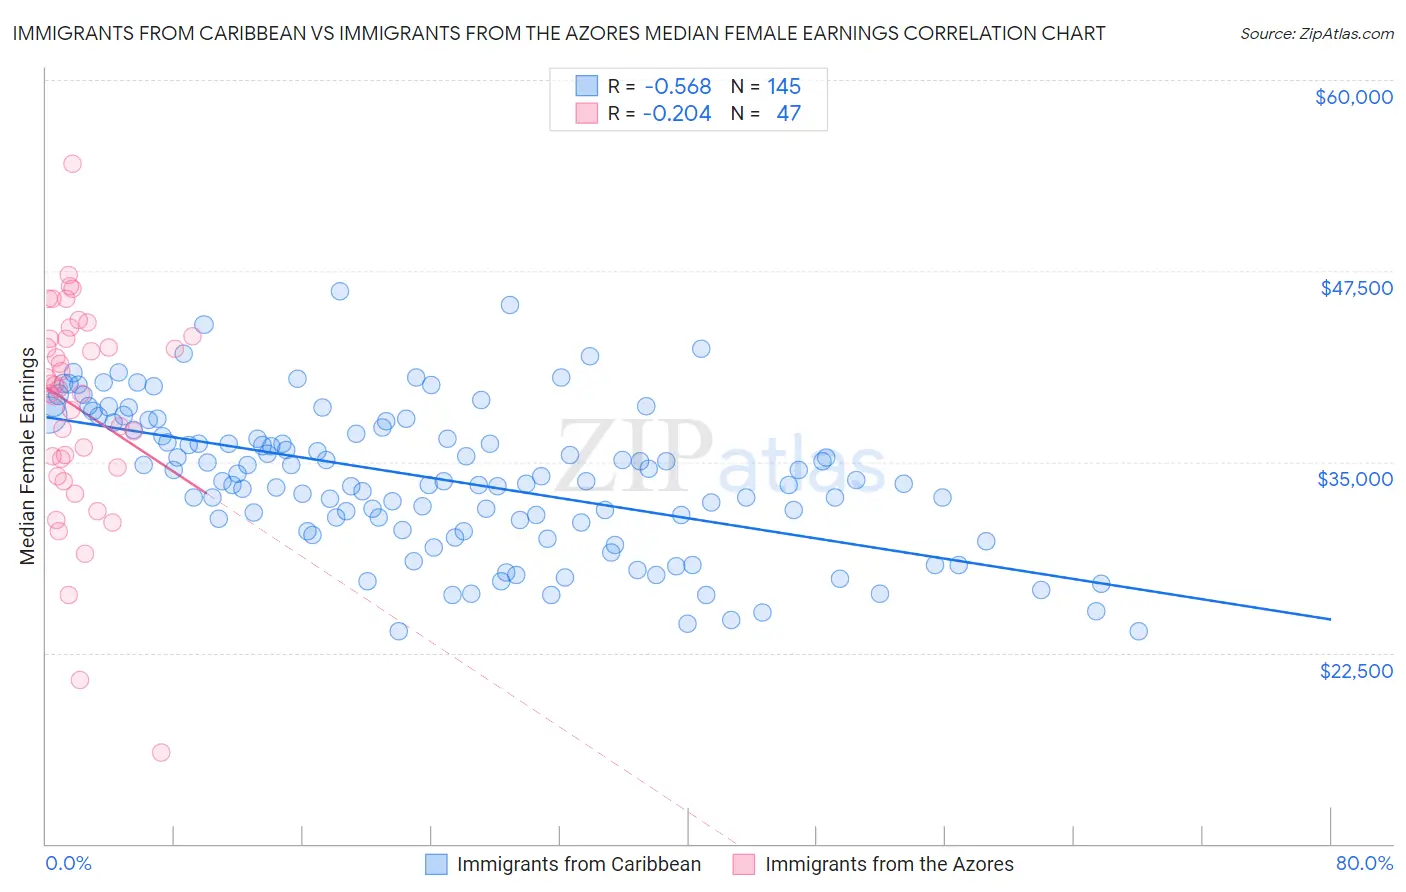 Immigrants from Caribbean vs Immigrants from the Azores Median Female Earnings